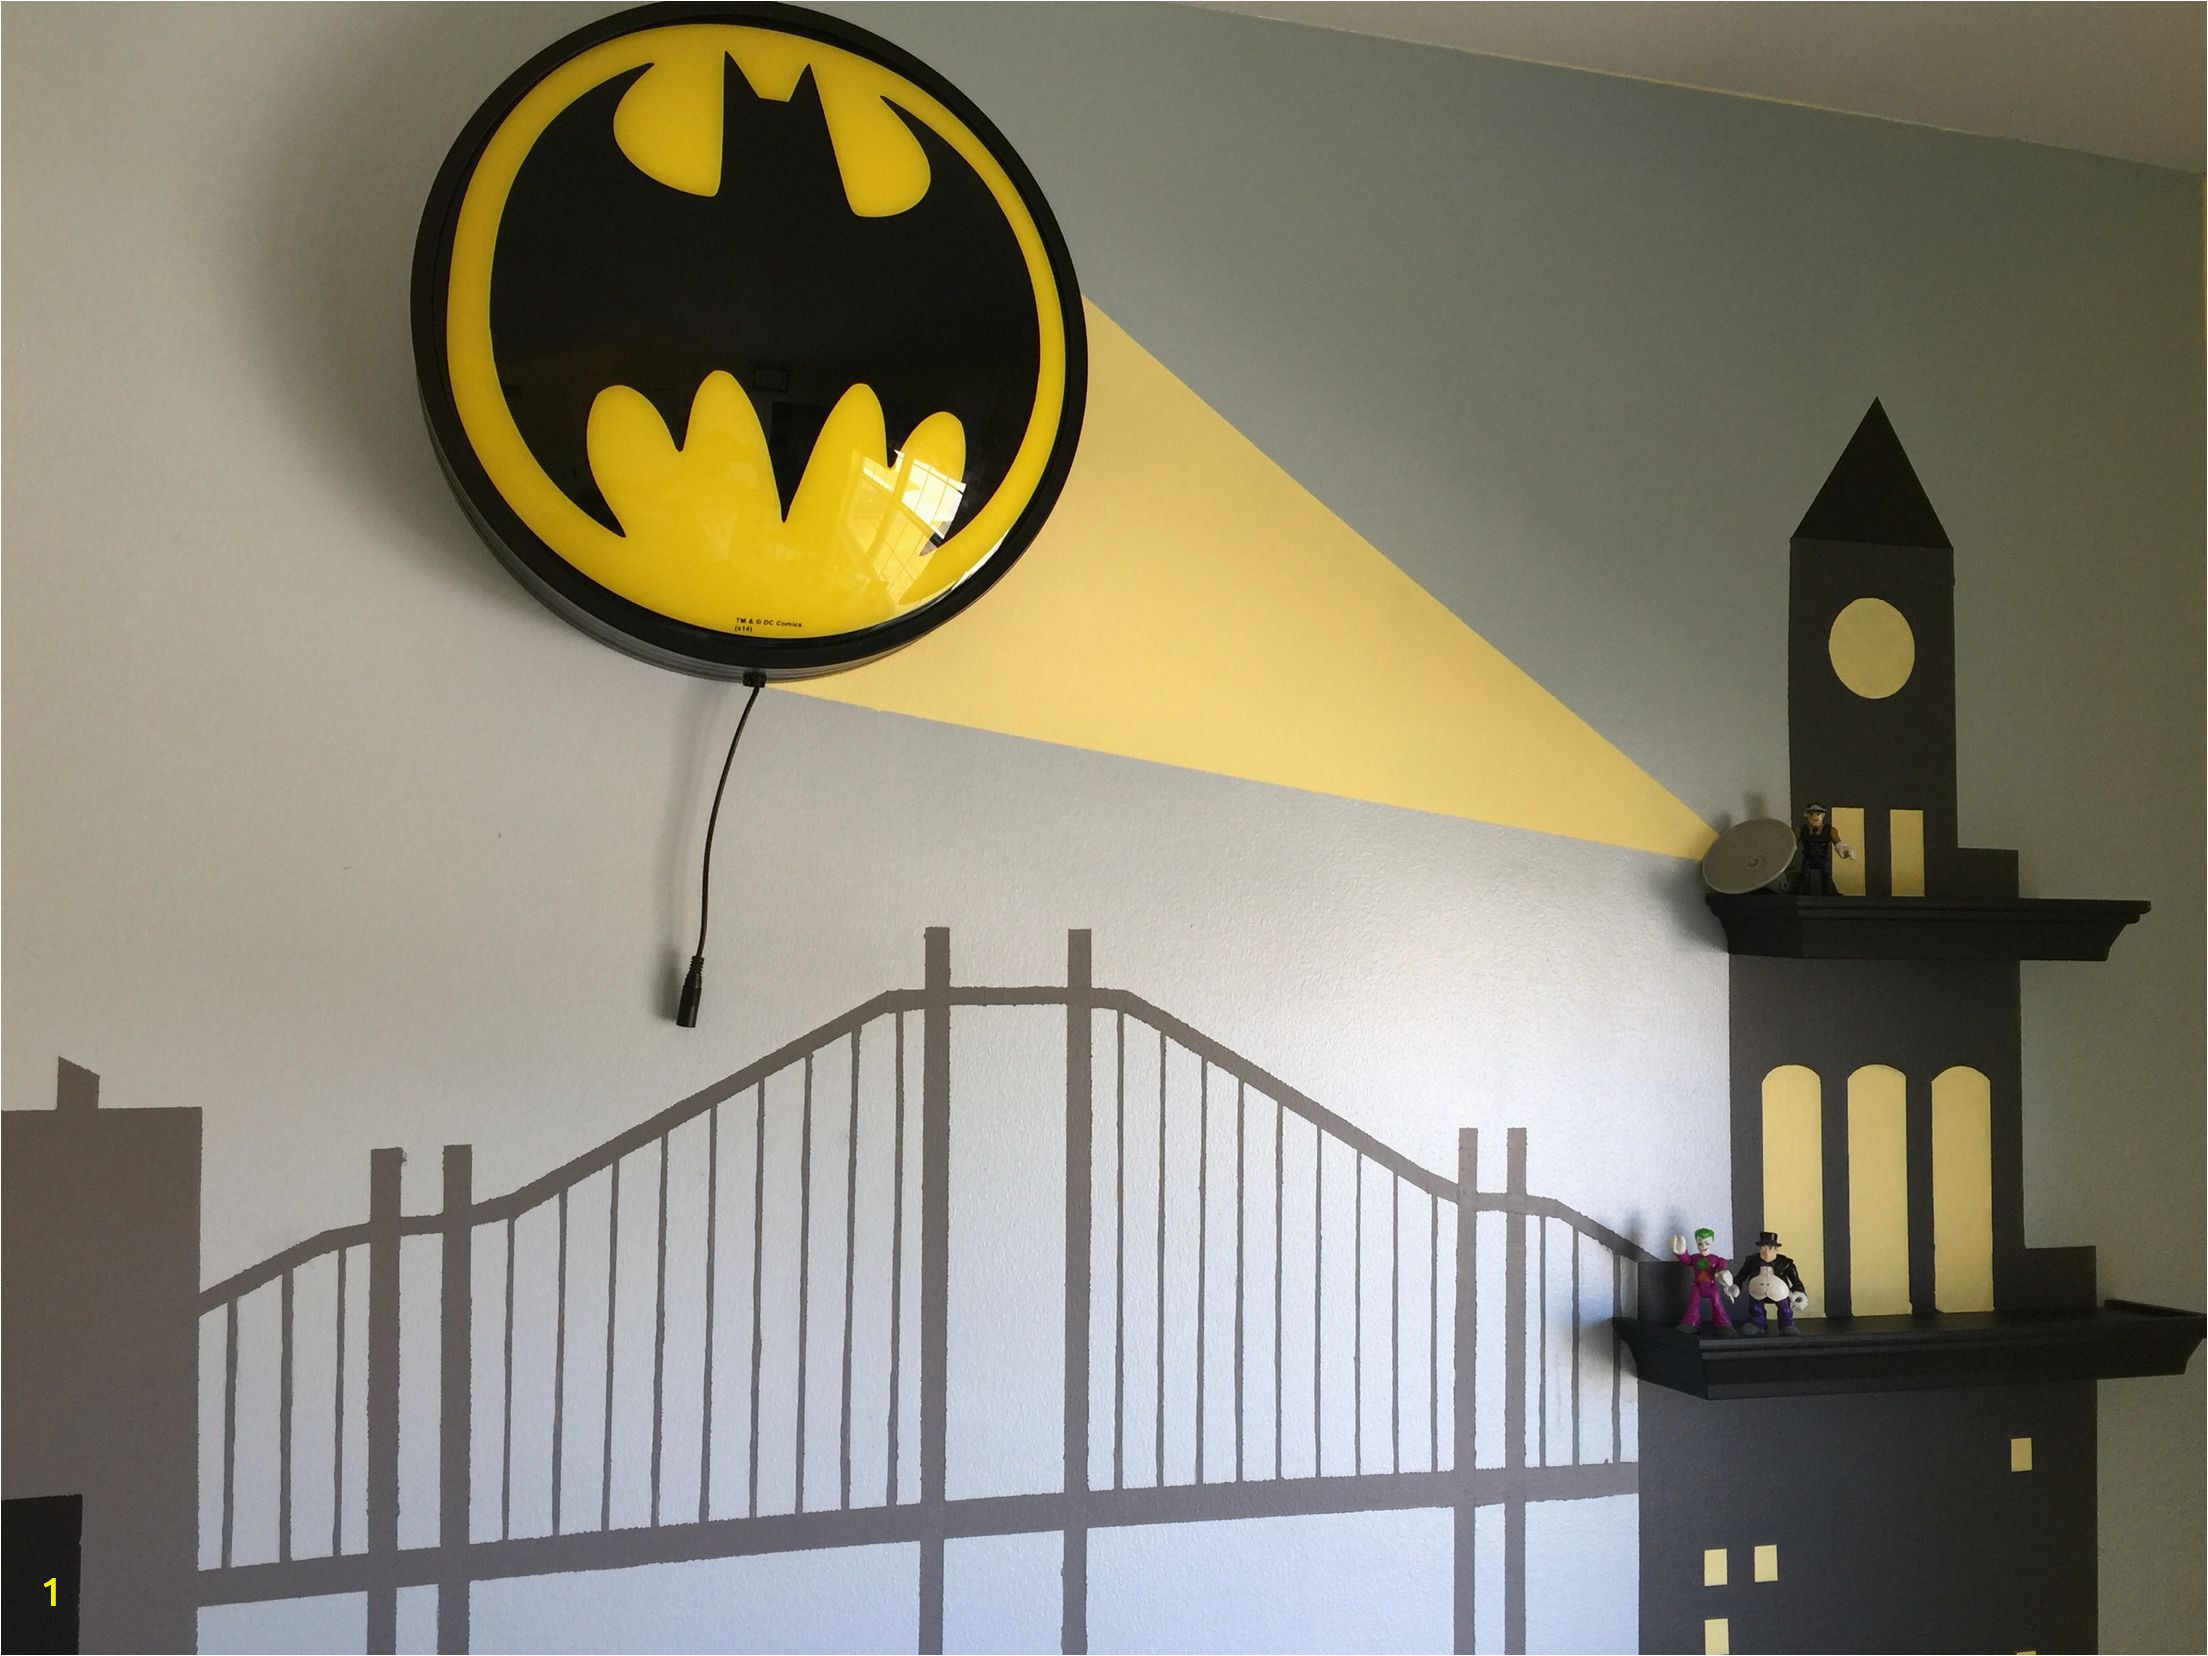 Superhero Cityscape Wall Mural Gotham City Bedroom Diy Surprise for My son